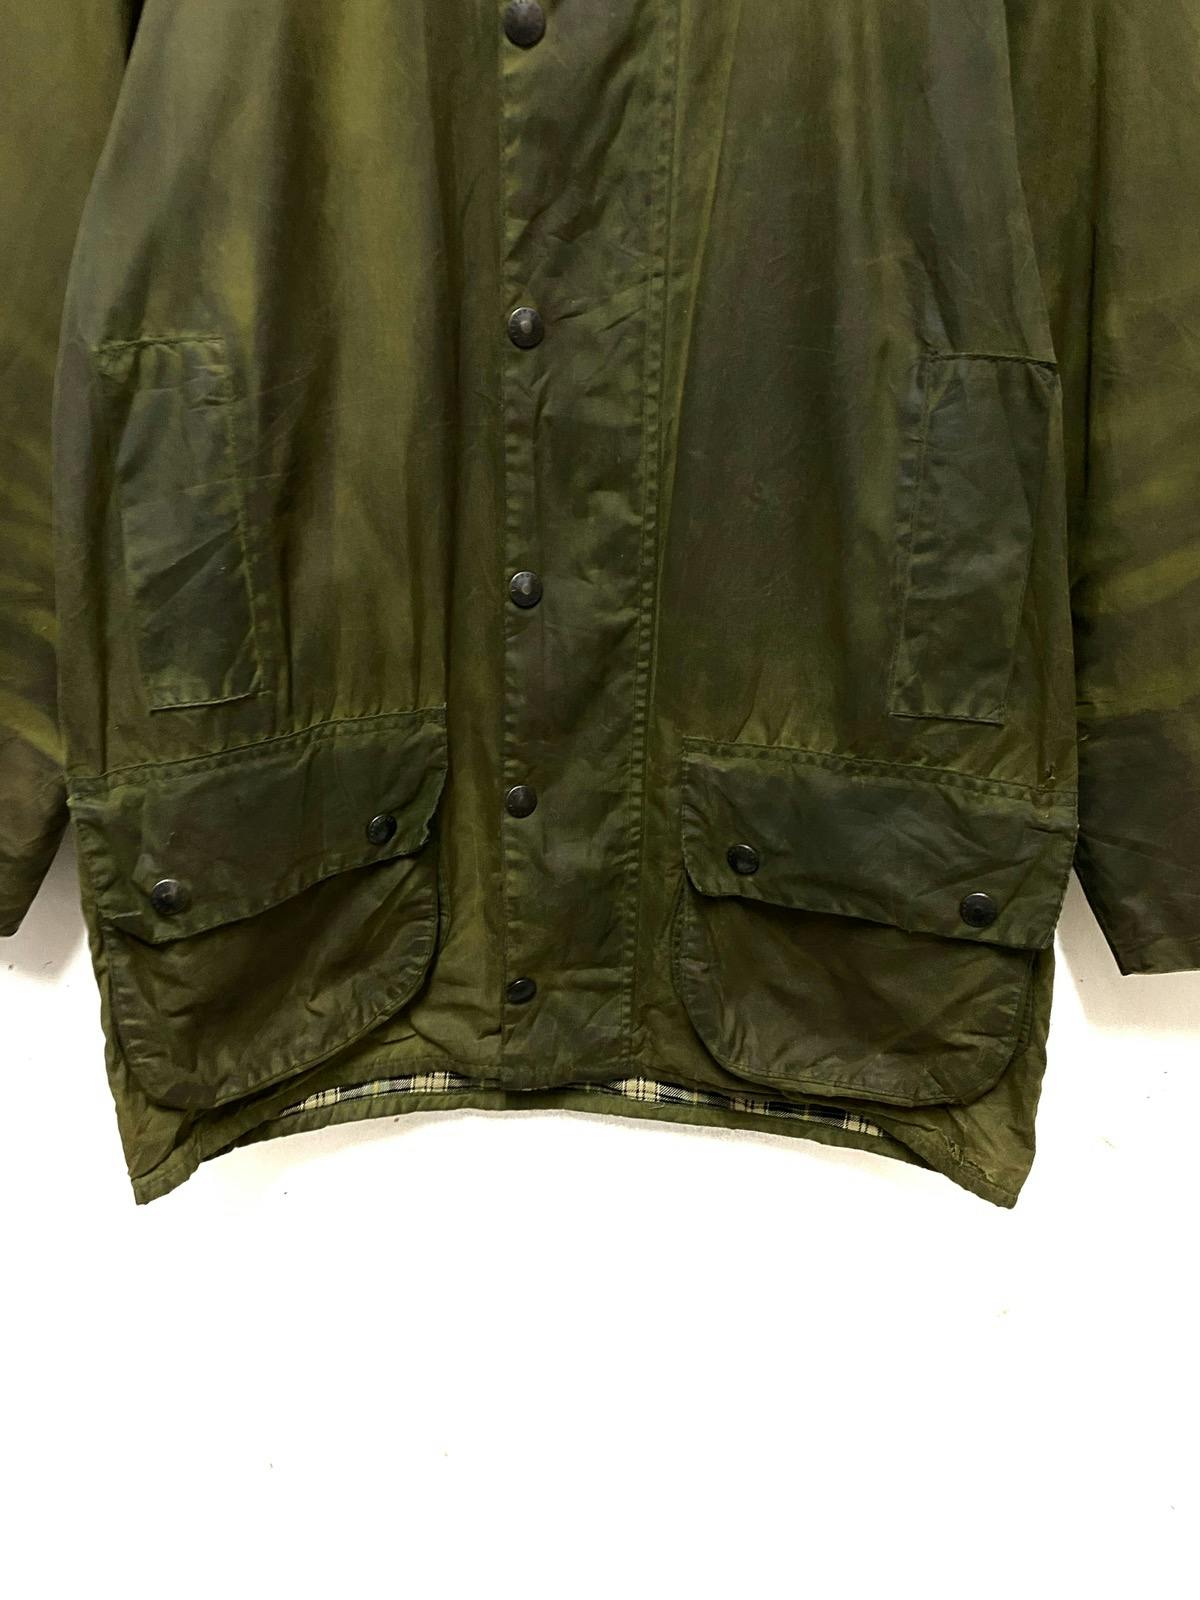 Vintage Barbour A150 Beaufort Wax Jacket Made in England - 3